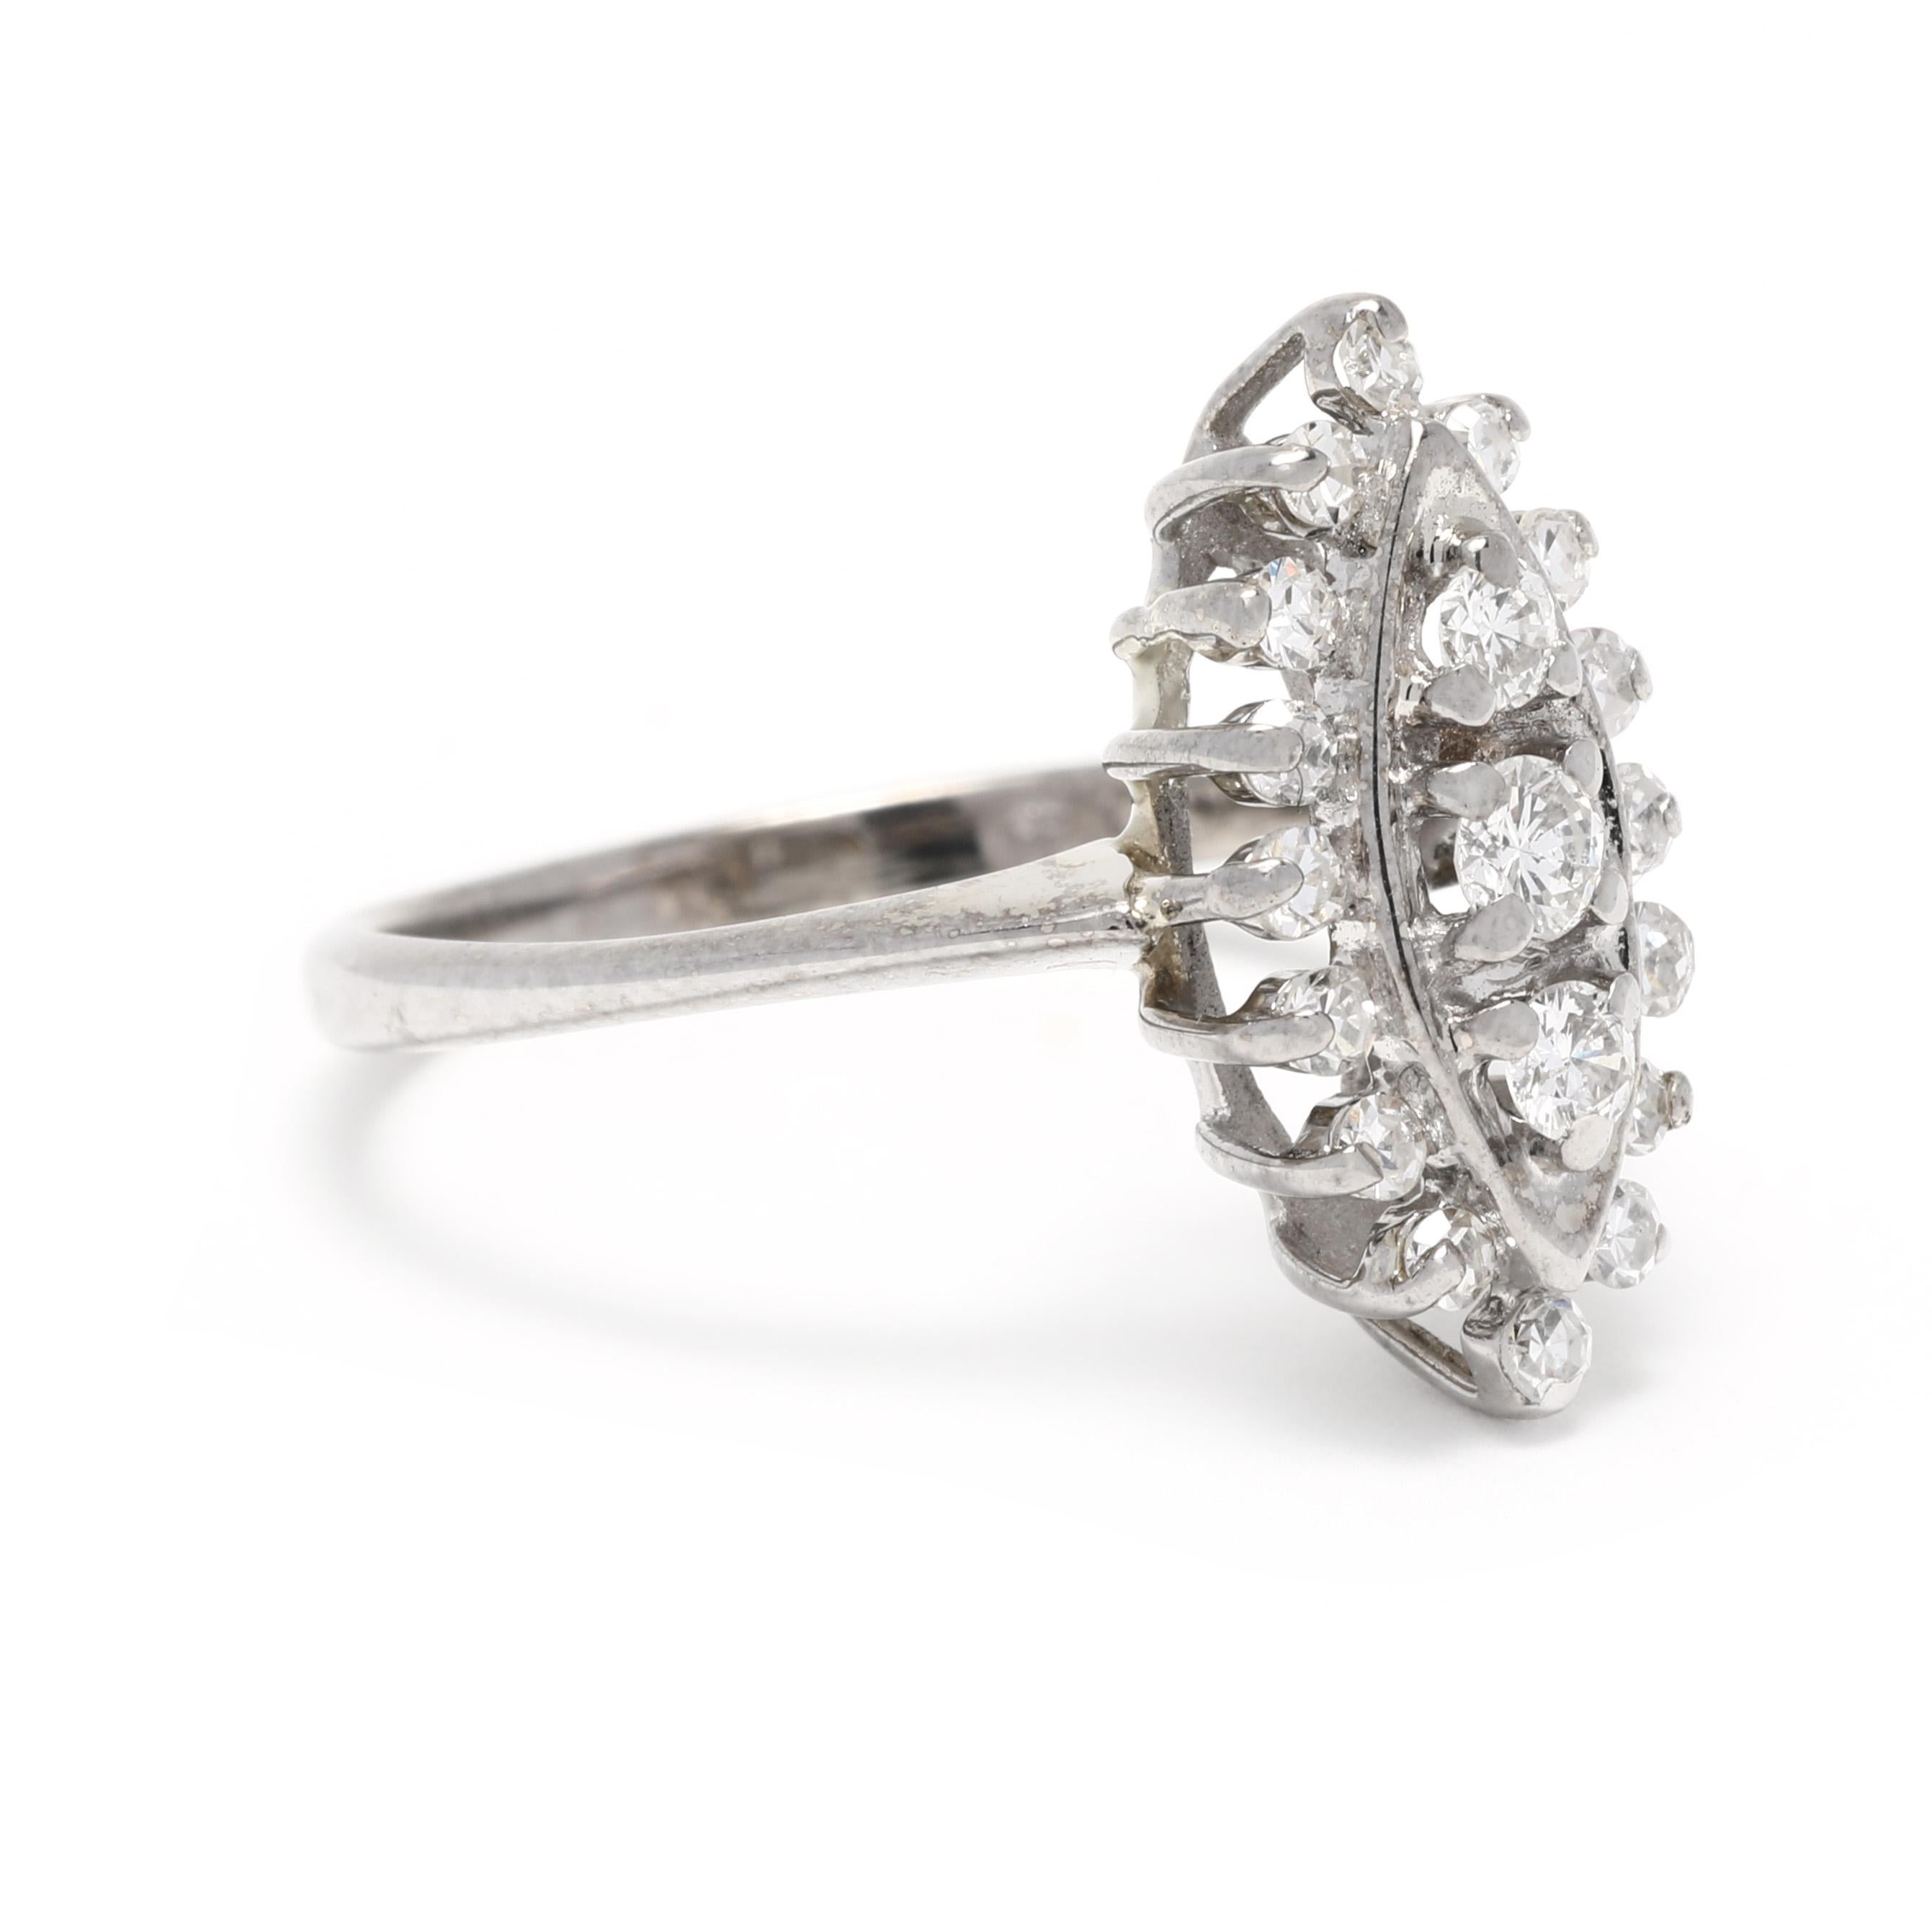 This beautiful 0.38ctw Diamond Navette Ring is crafted in 14K White Gold and is a size 6. This gorgeous diamond cluster ring features a marquise diamond setting and is sure to turn heads. With its stunning design, this diamond ring is perfect for a